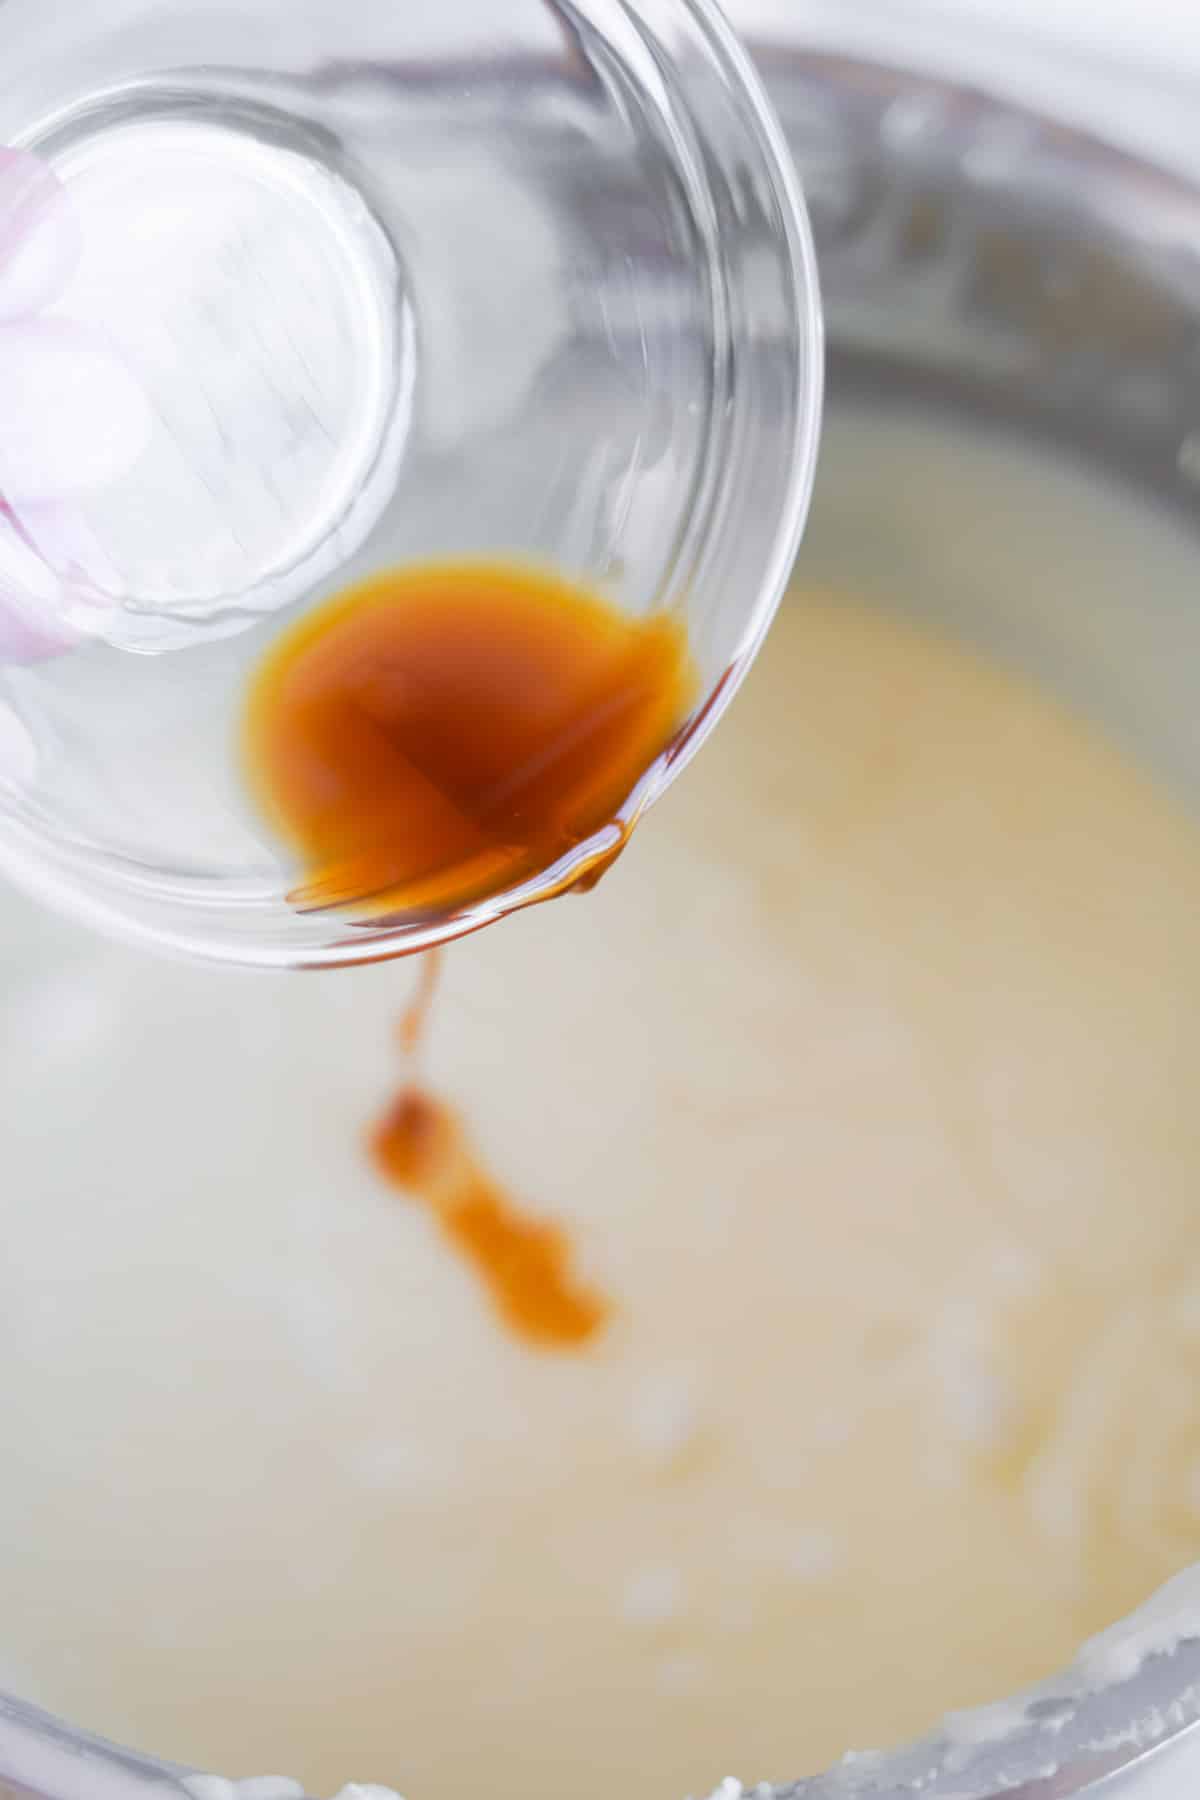 A bowl of vanilla extract being poured into a liquid vanilla fudge batter.